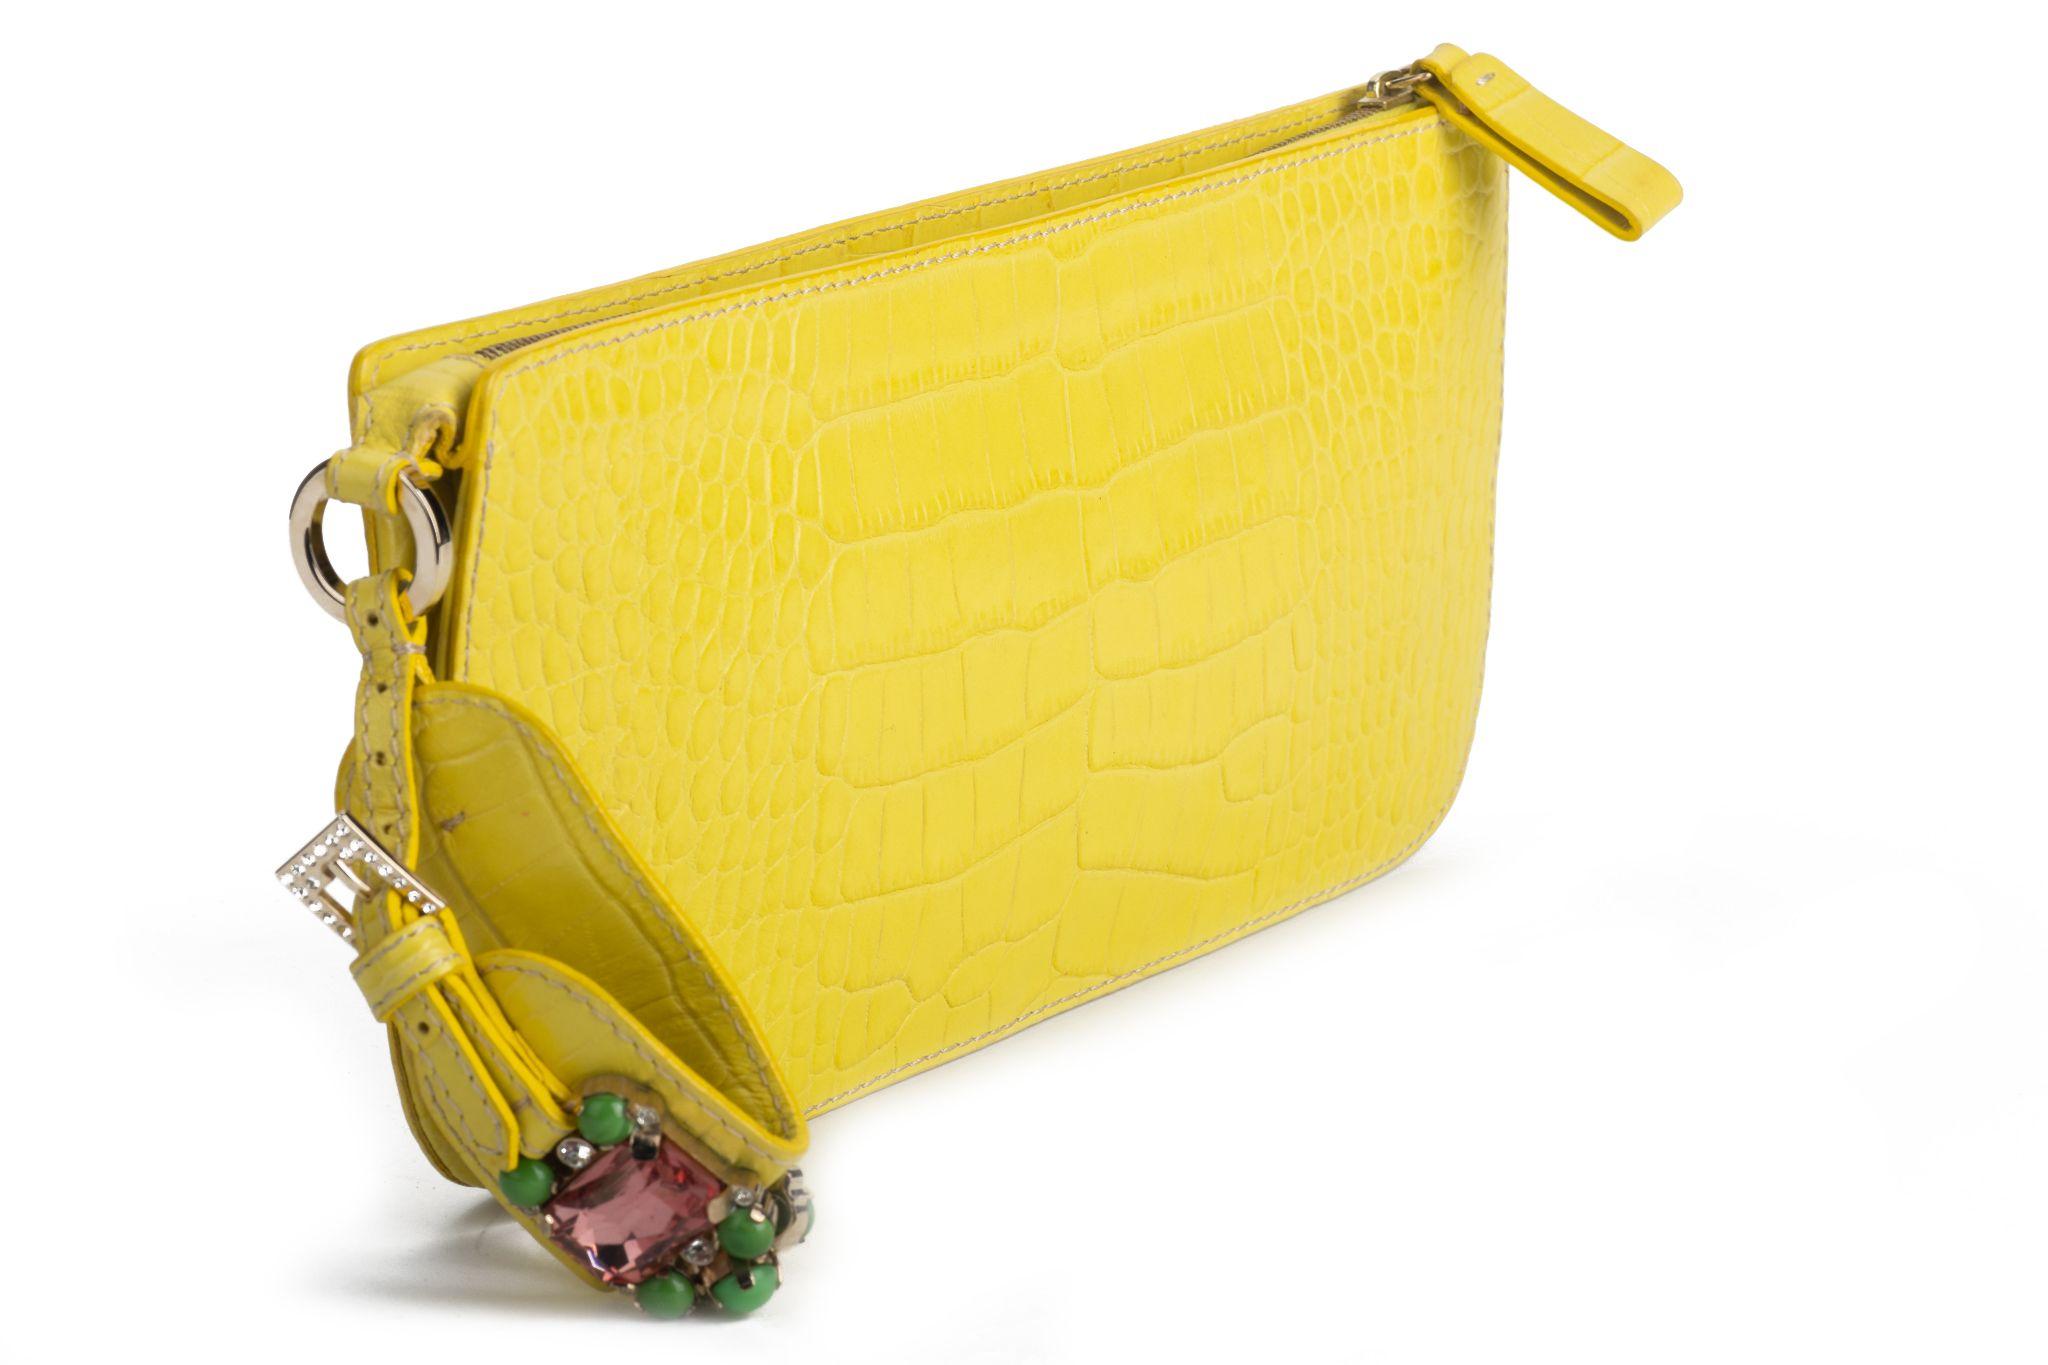 Valentino wrist purse in a vibrant yellow. The leather has a crocodile skin pattern. The wrist band is decorated with multiple stones in different colors and is adjustable. The interior is made of fabric and the Valentino logo is stitched in it. The